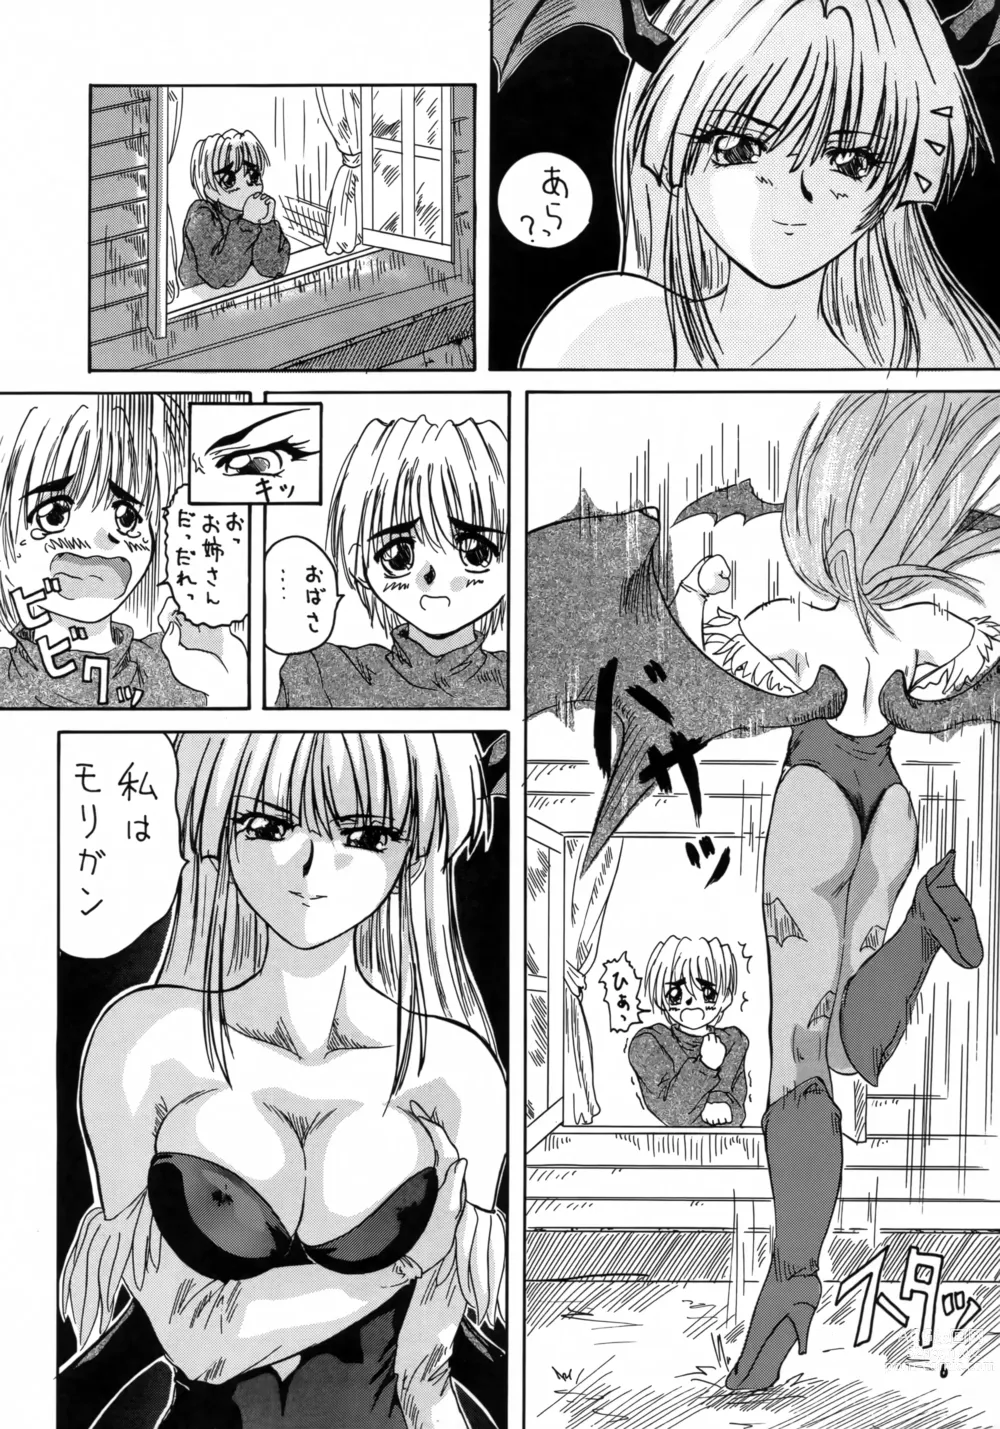 Page 5 of doujinshi 2STROKE TZR